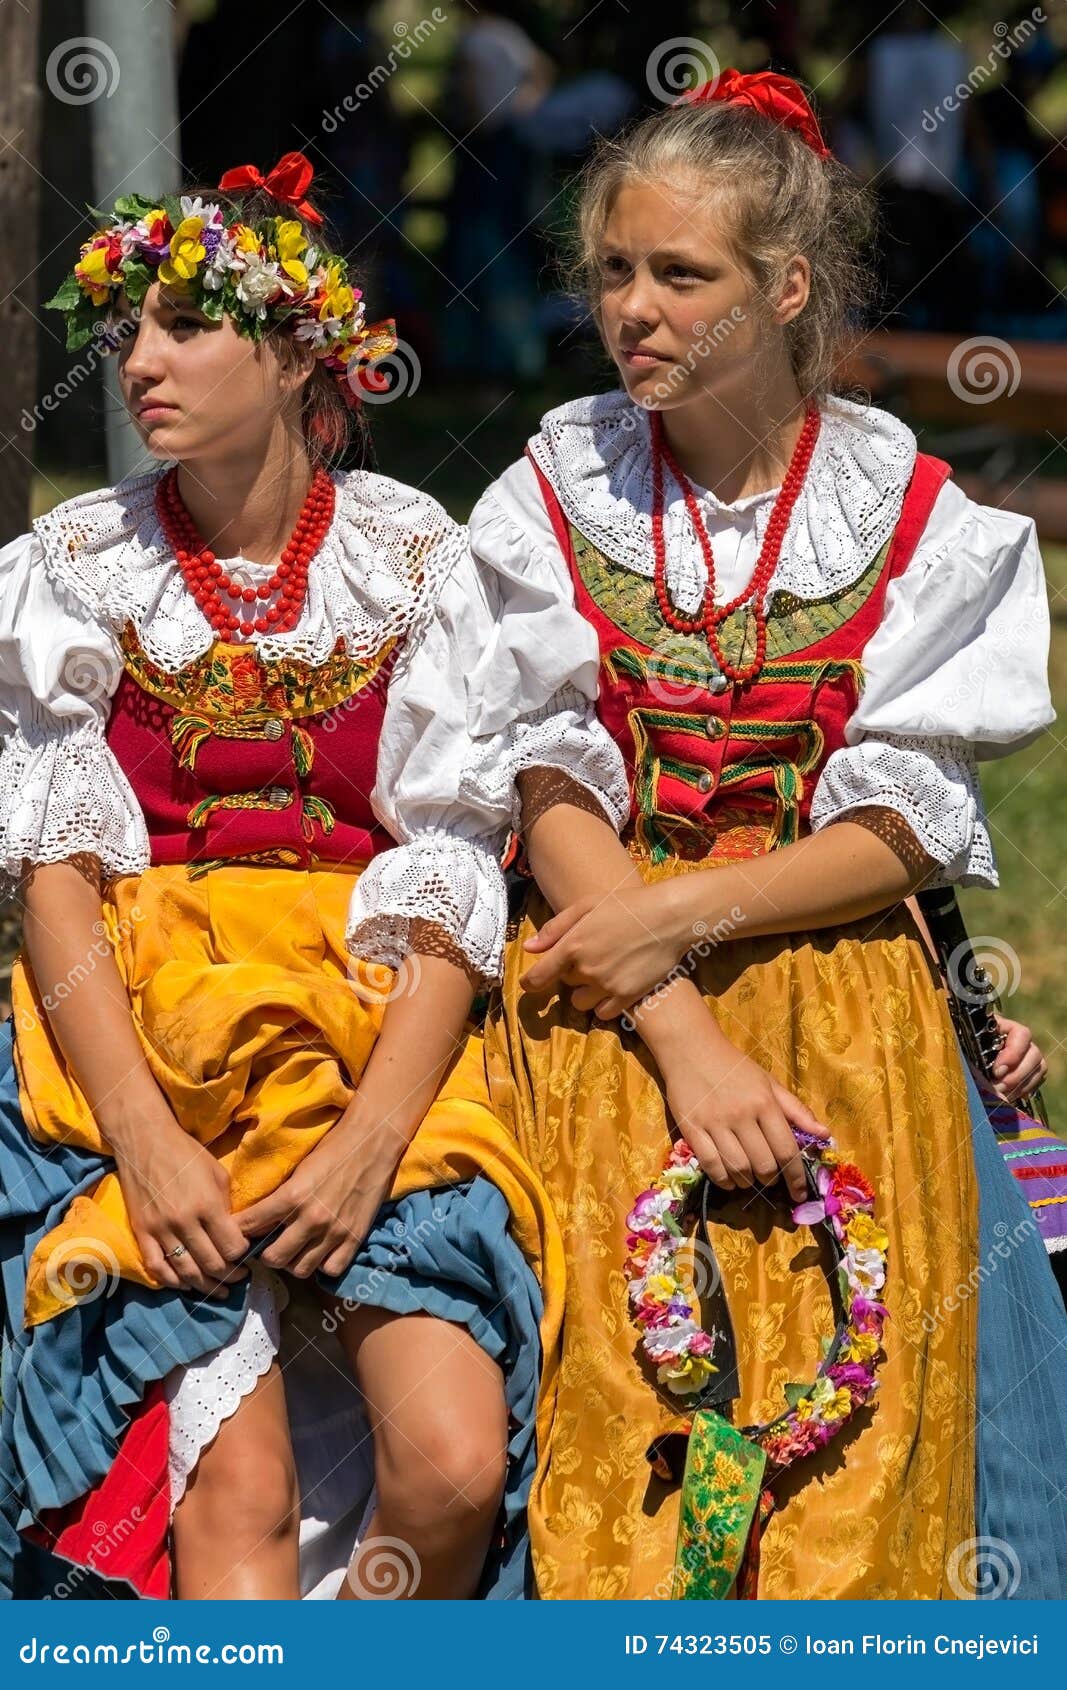 Young Girls from Poland in Traditional Costume 8 Editorial Image ...